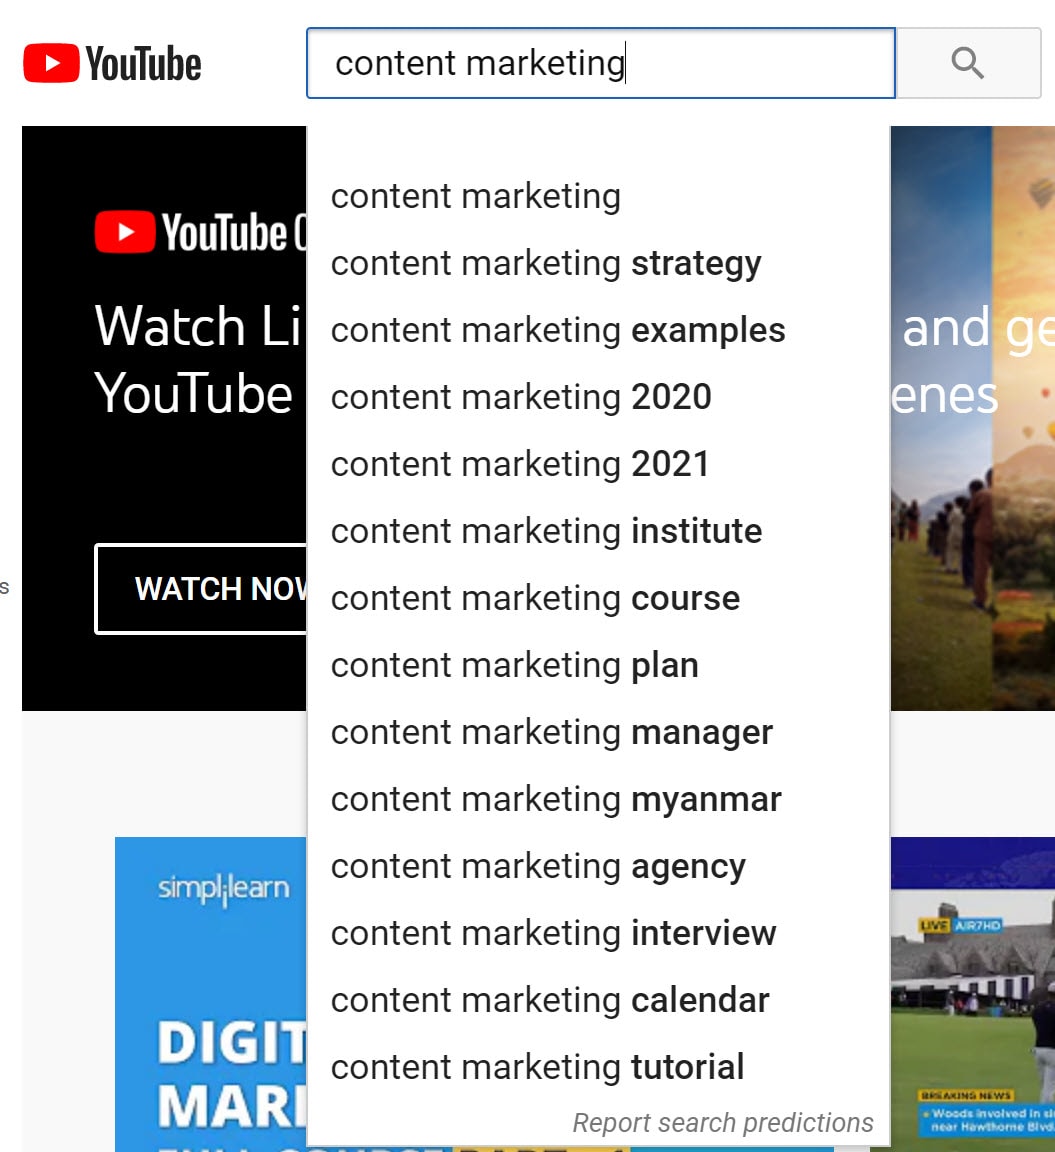 Scfeenshot of results for an auto-complete search for content marketing